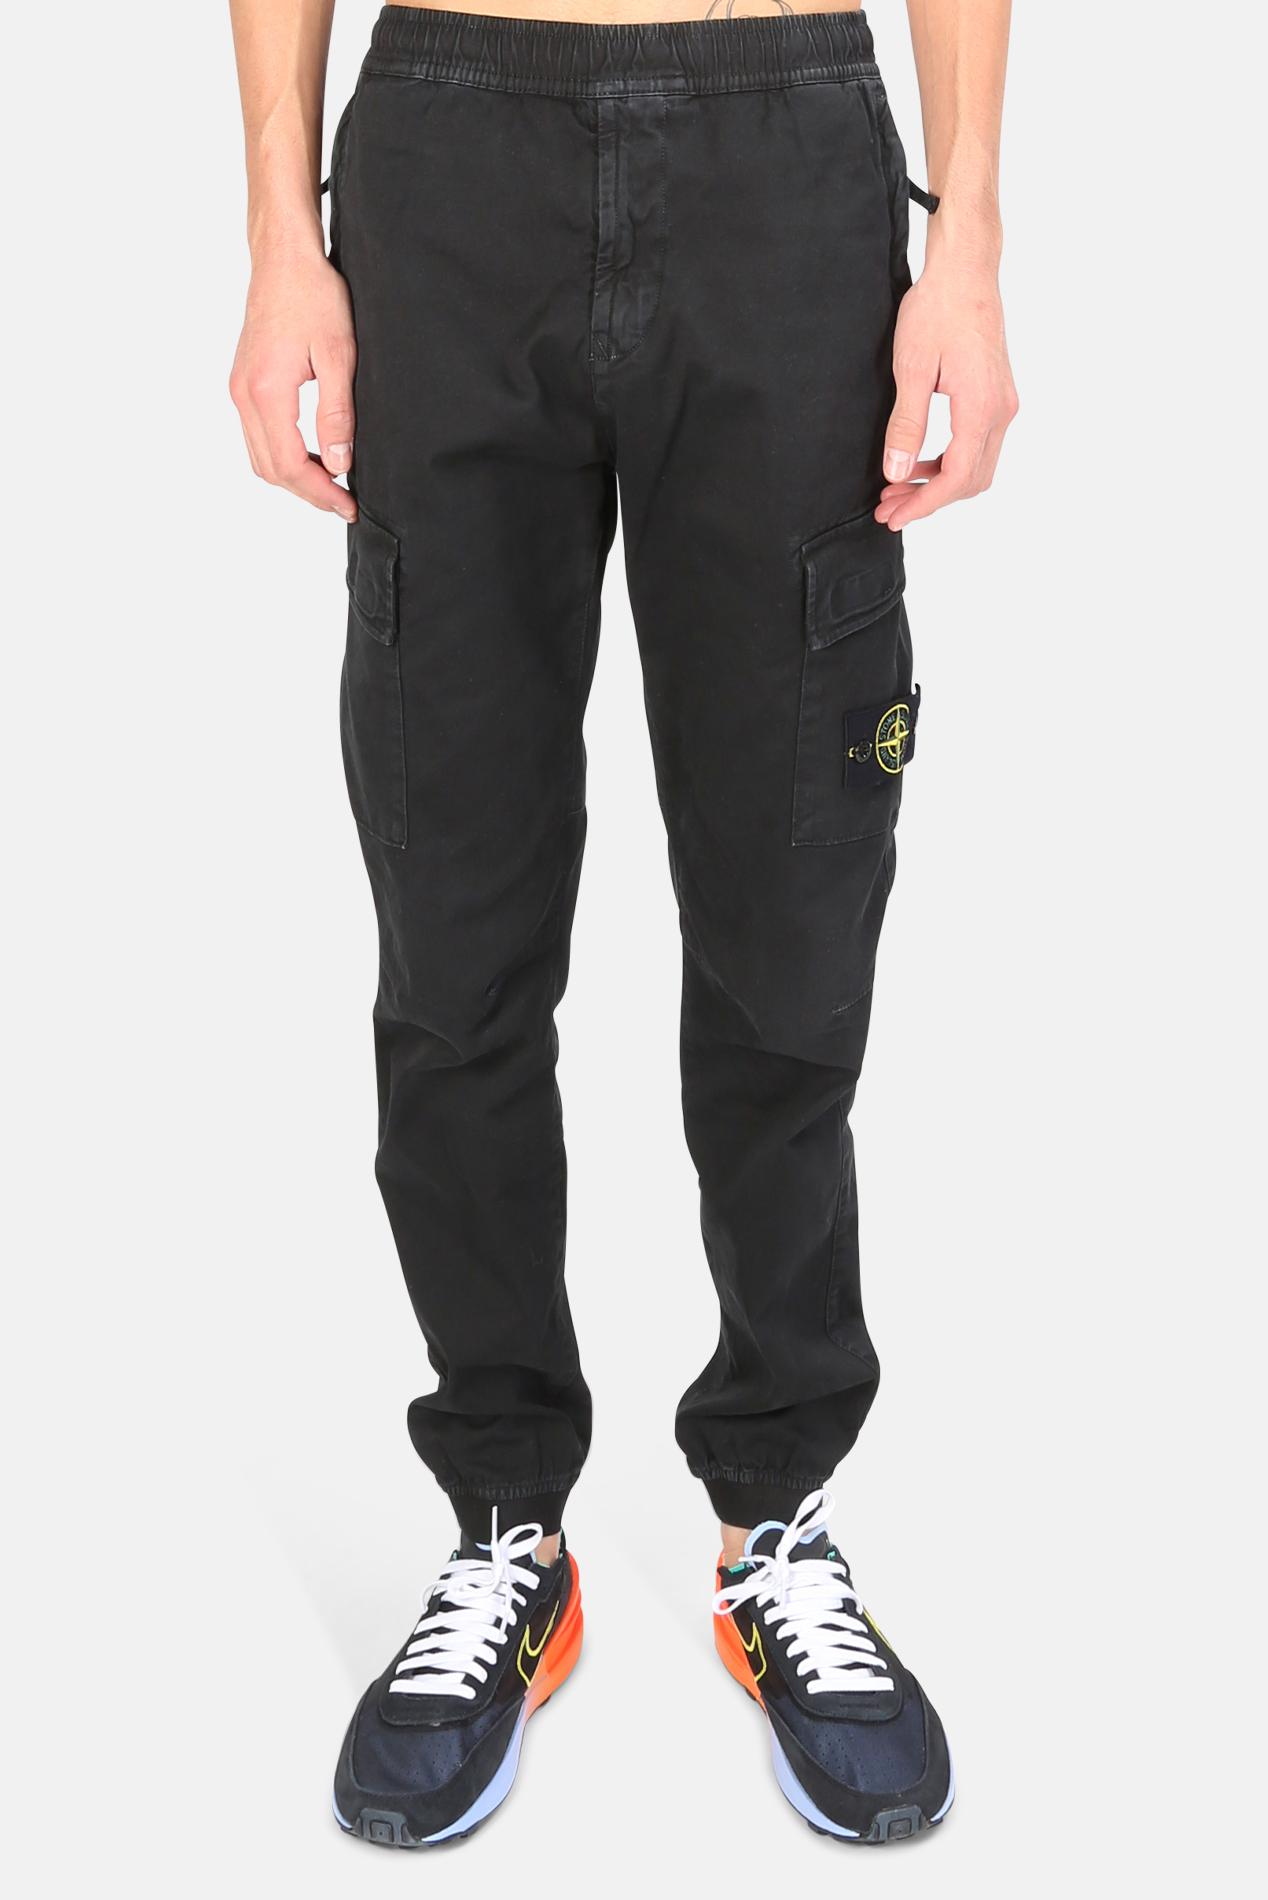 Stone Island Cargo Trousers in Black for Men | Lyst Canada